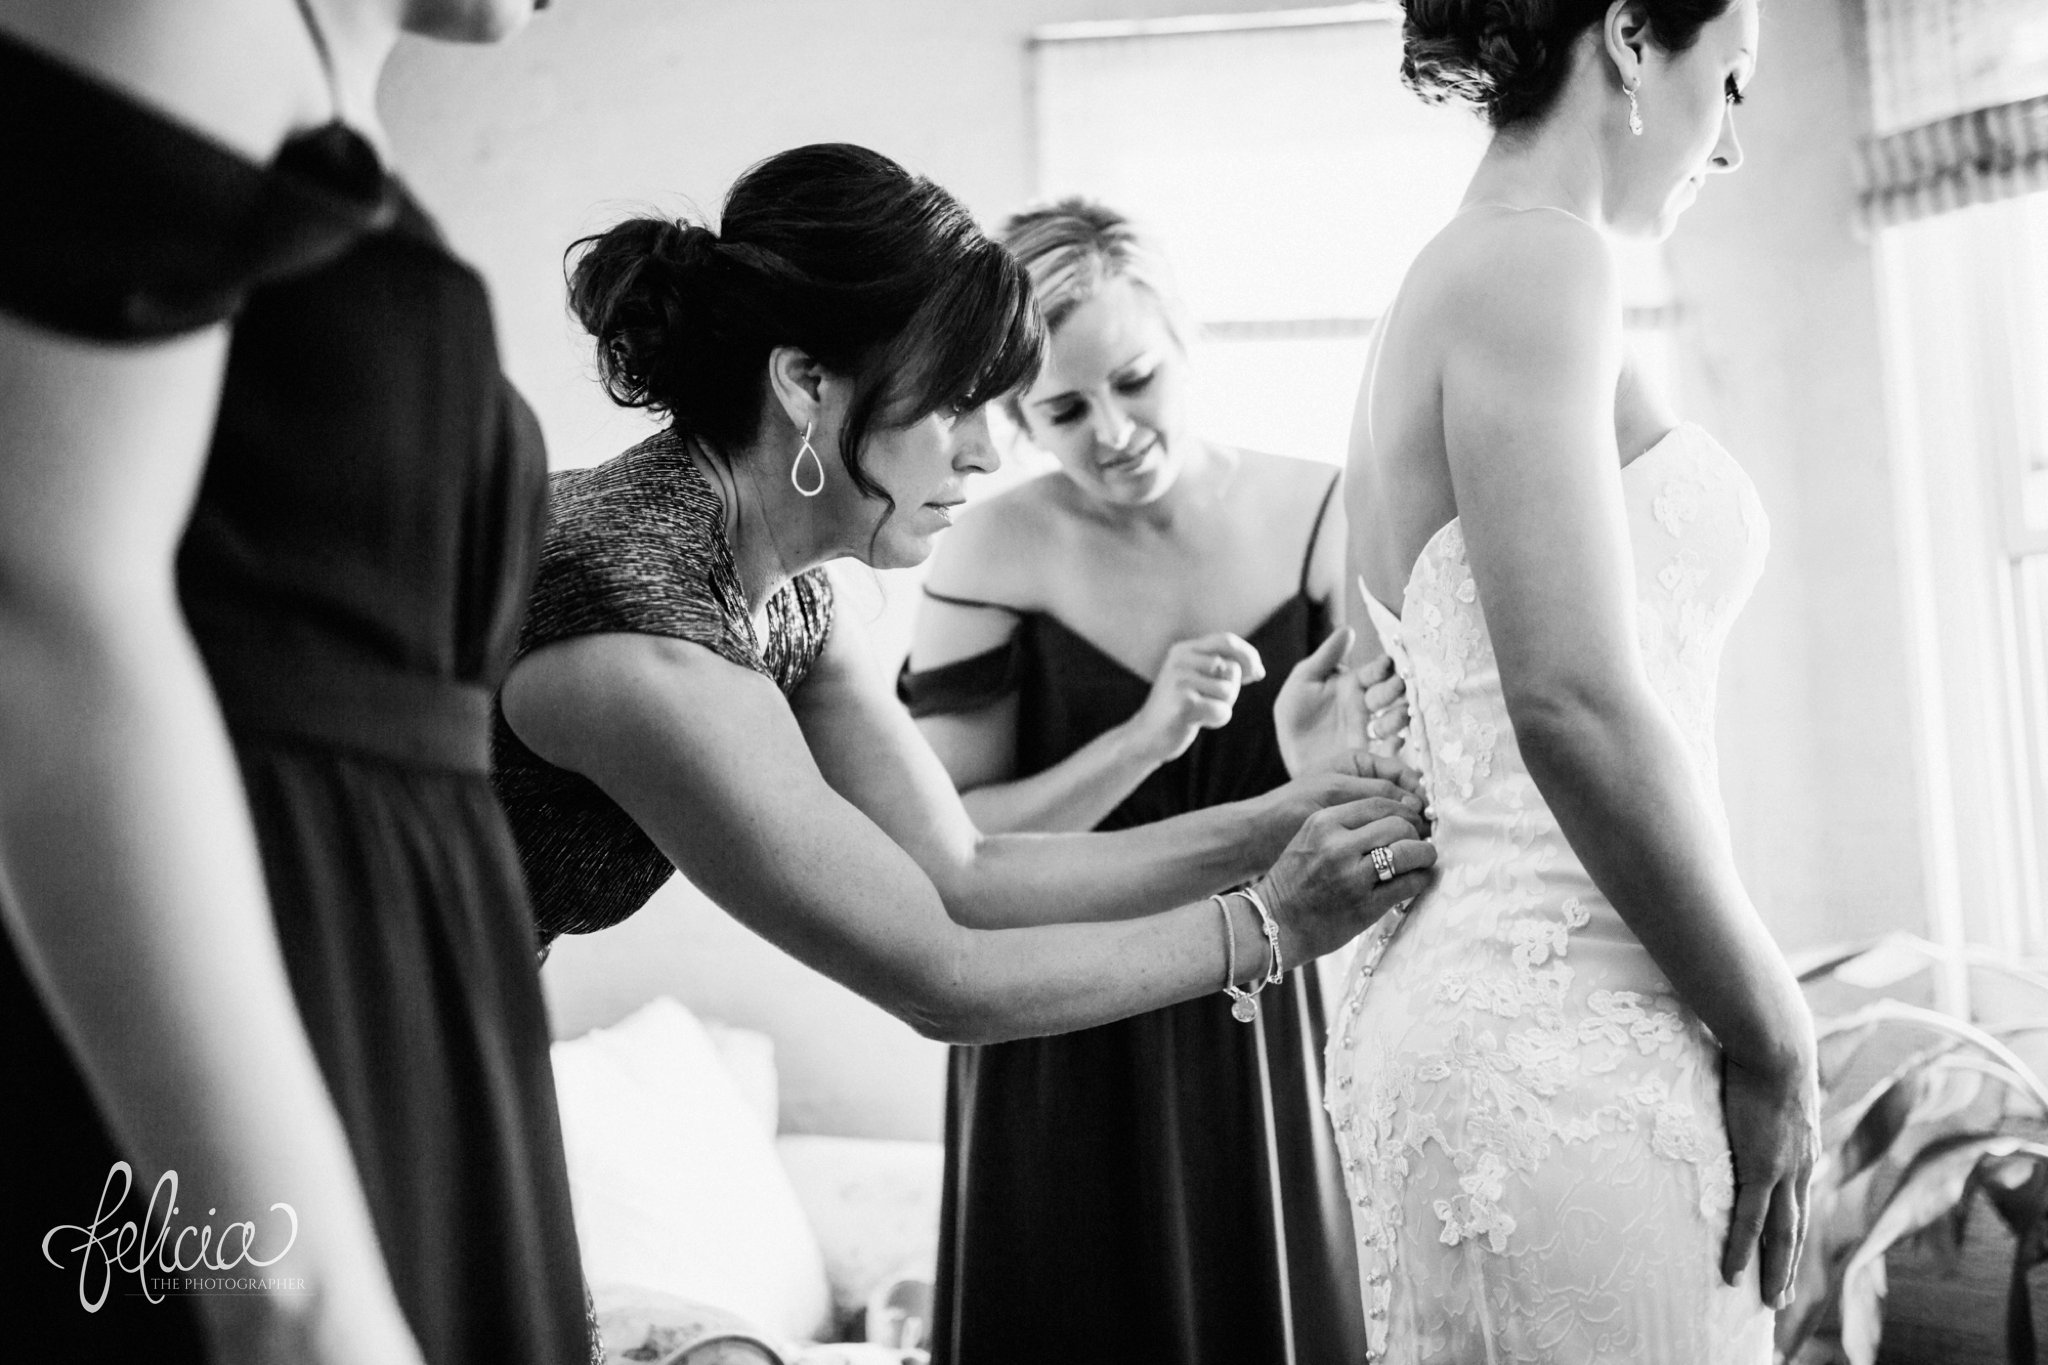 images by feliciathephotographer.com | wedding photographer | kansas city | getting ready | putting on the dress | bridesmaids | buttons | lace floral dress | strapless | emily hart | black and white | 